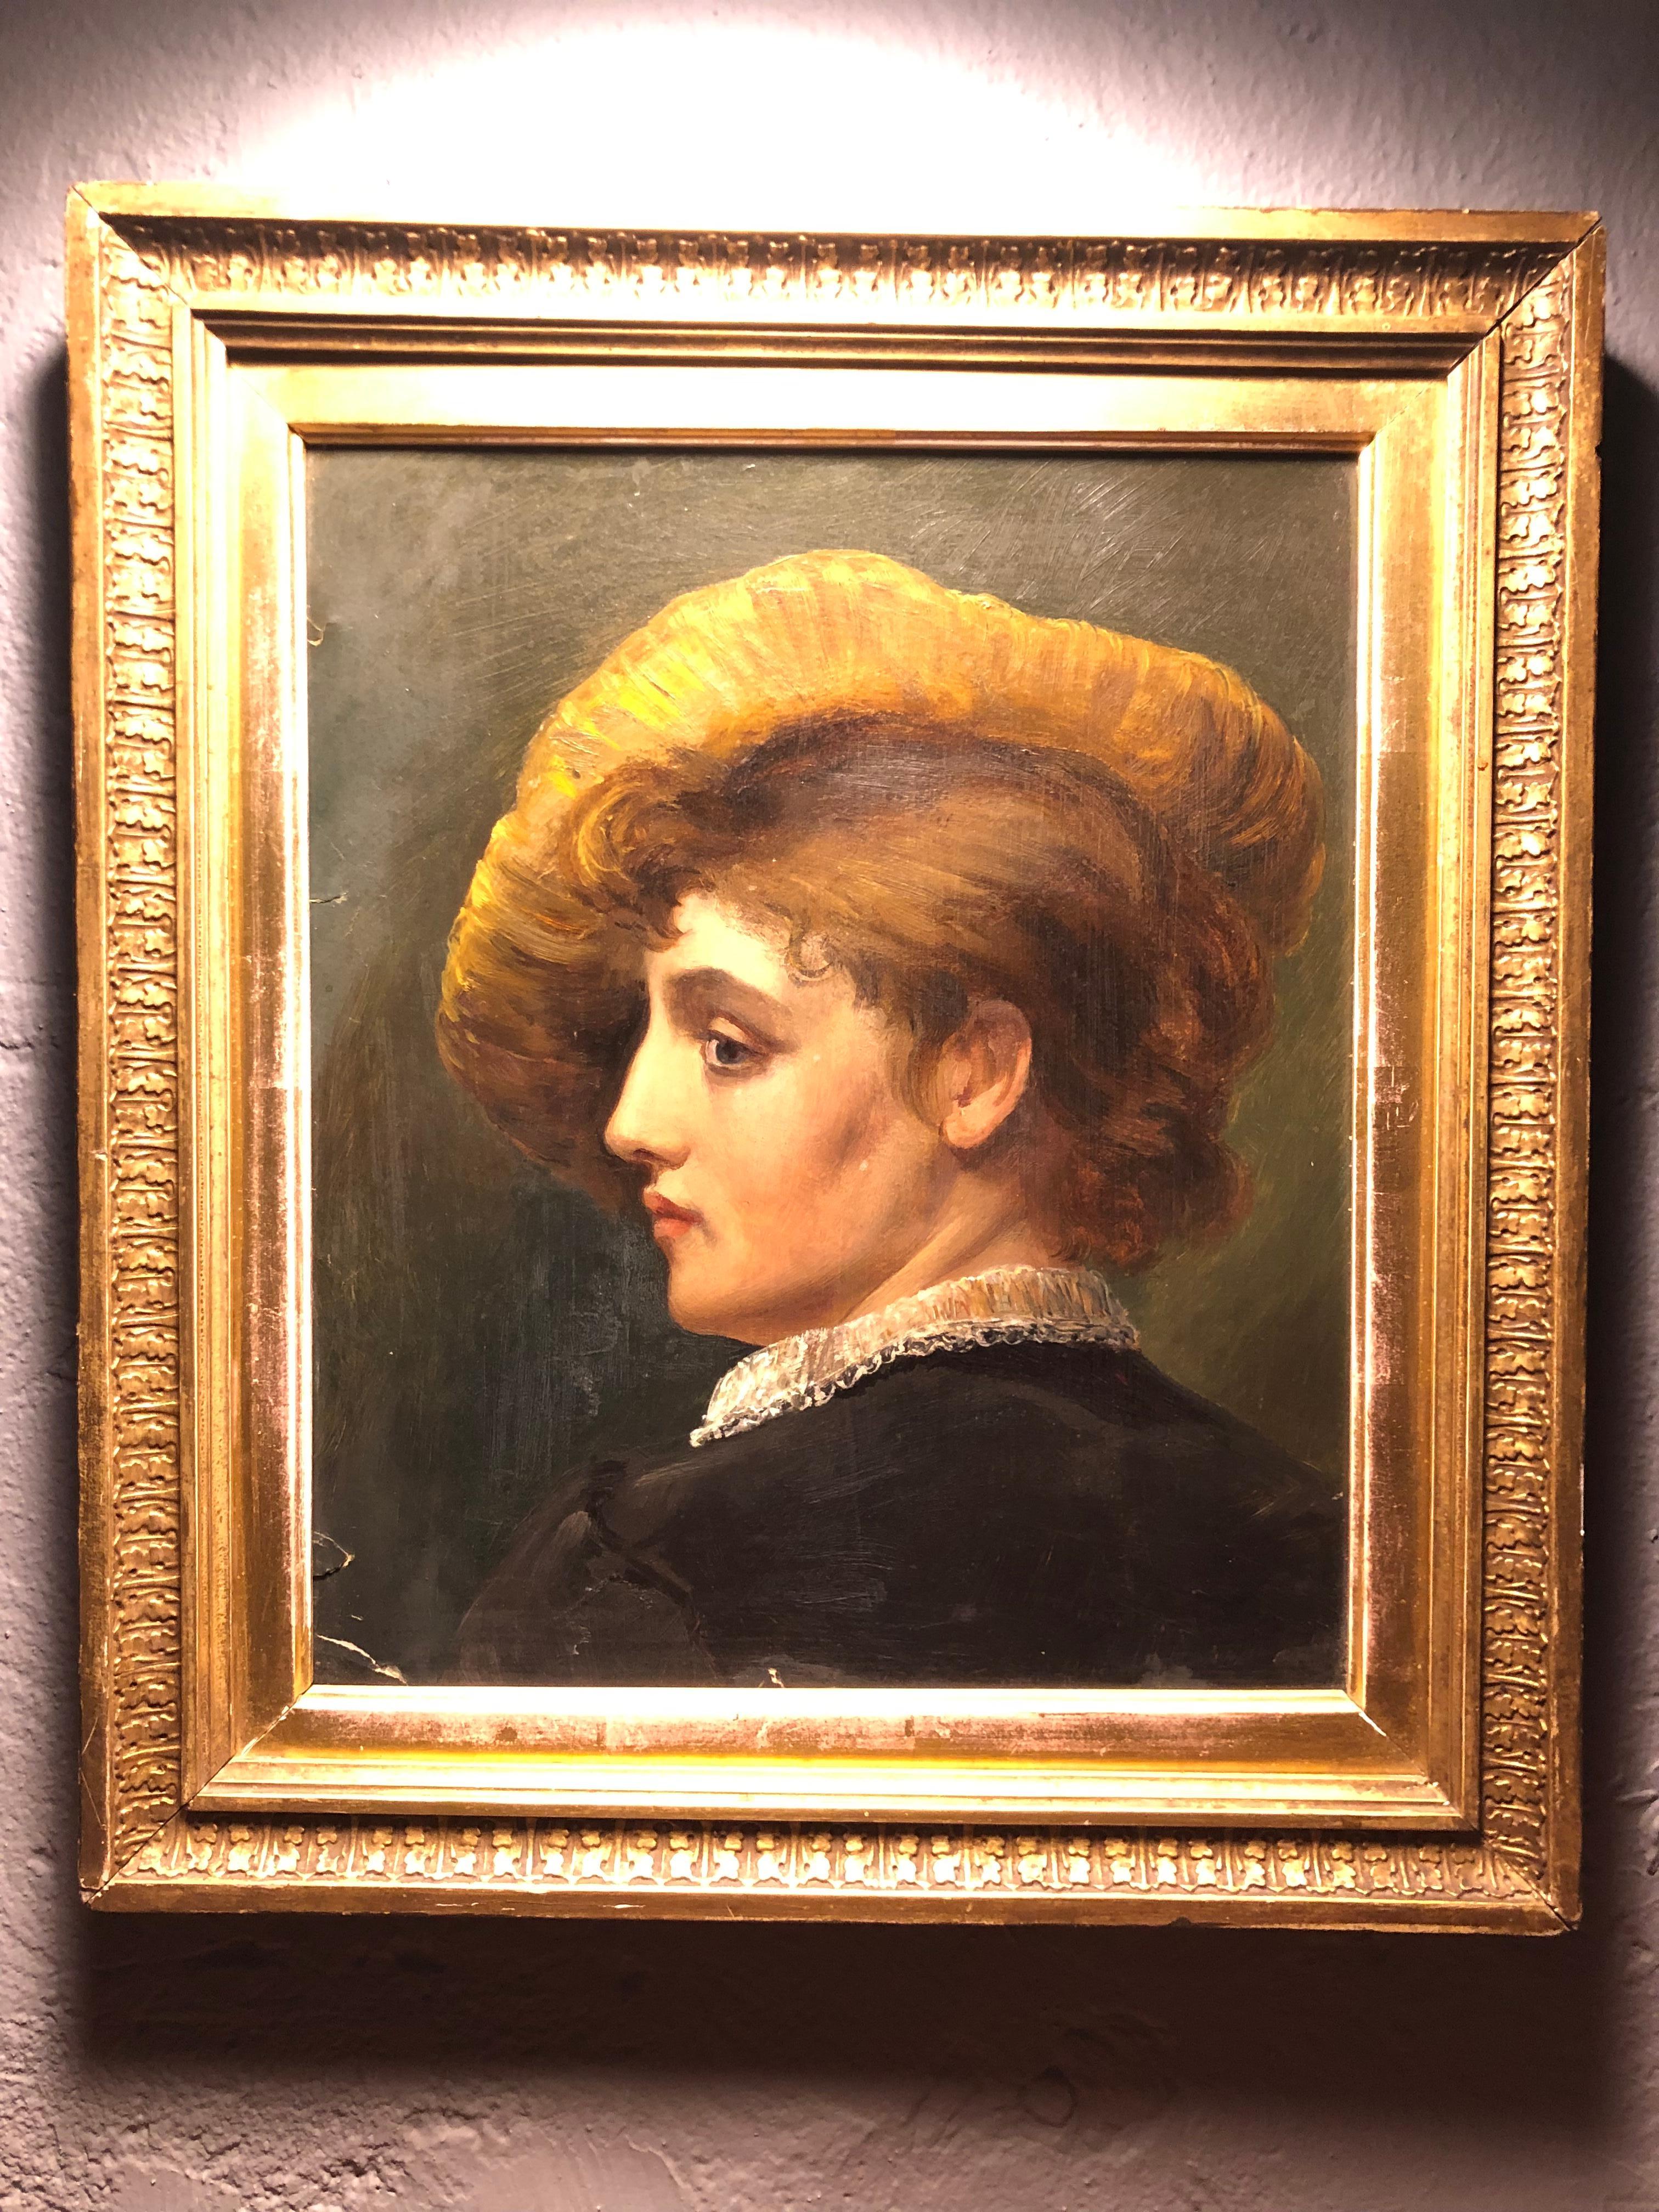 A strikingly beautiful antique oil on board portrait of a woman in a hat.
With age related wear and patina. 
Some cracking to the paint at the edge but nothing that detracts from her beauty. Please see the pictures. 
It has not been out of the